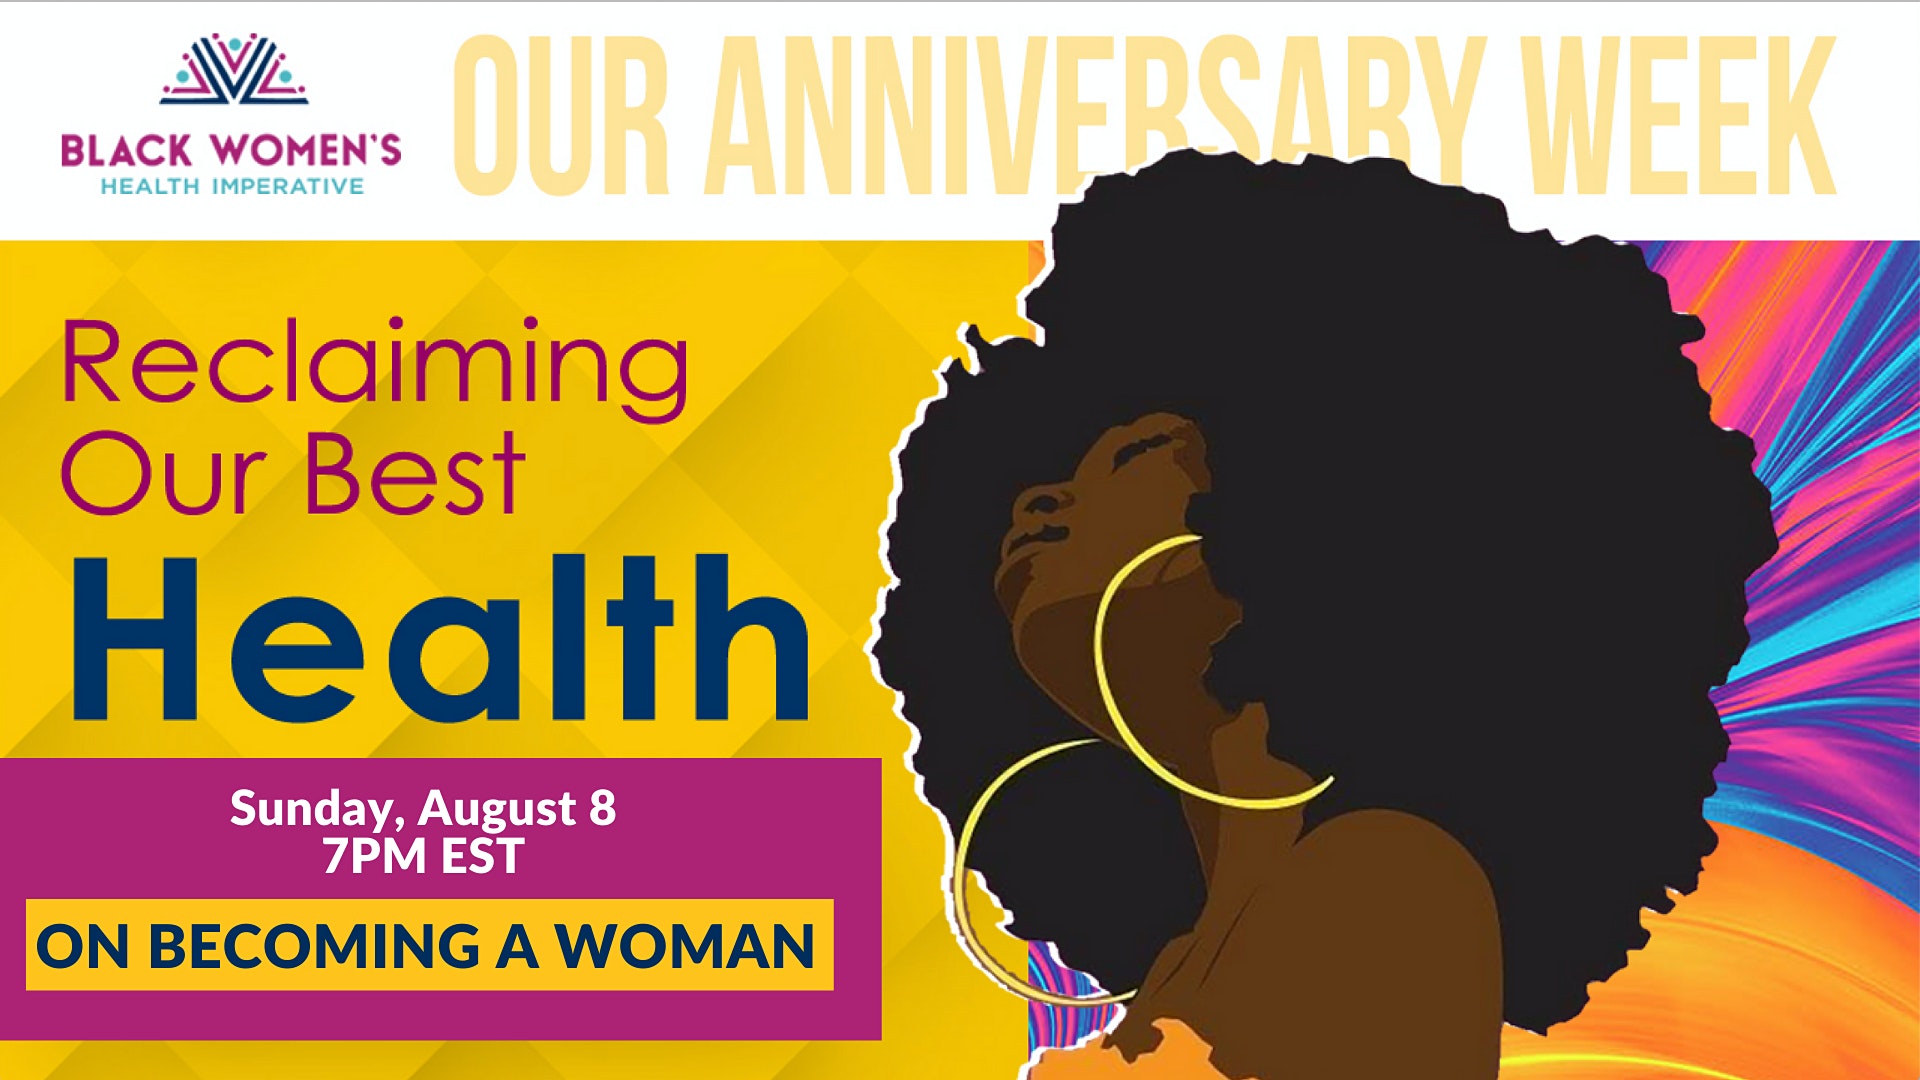 On Becoming a Woman: BWHI Anniversary Week